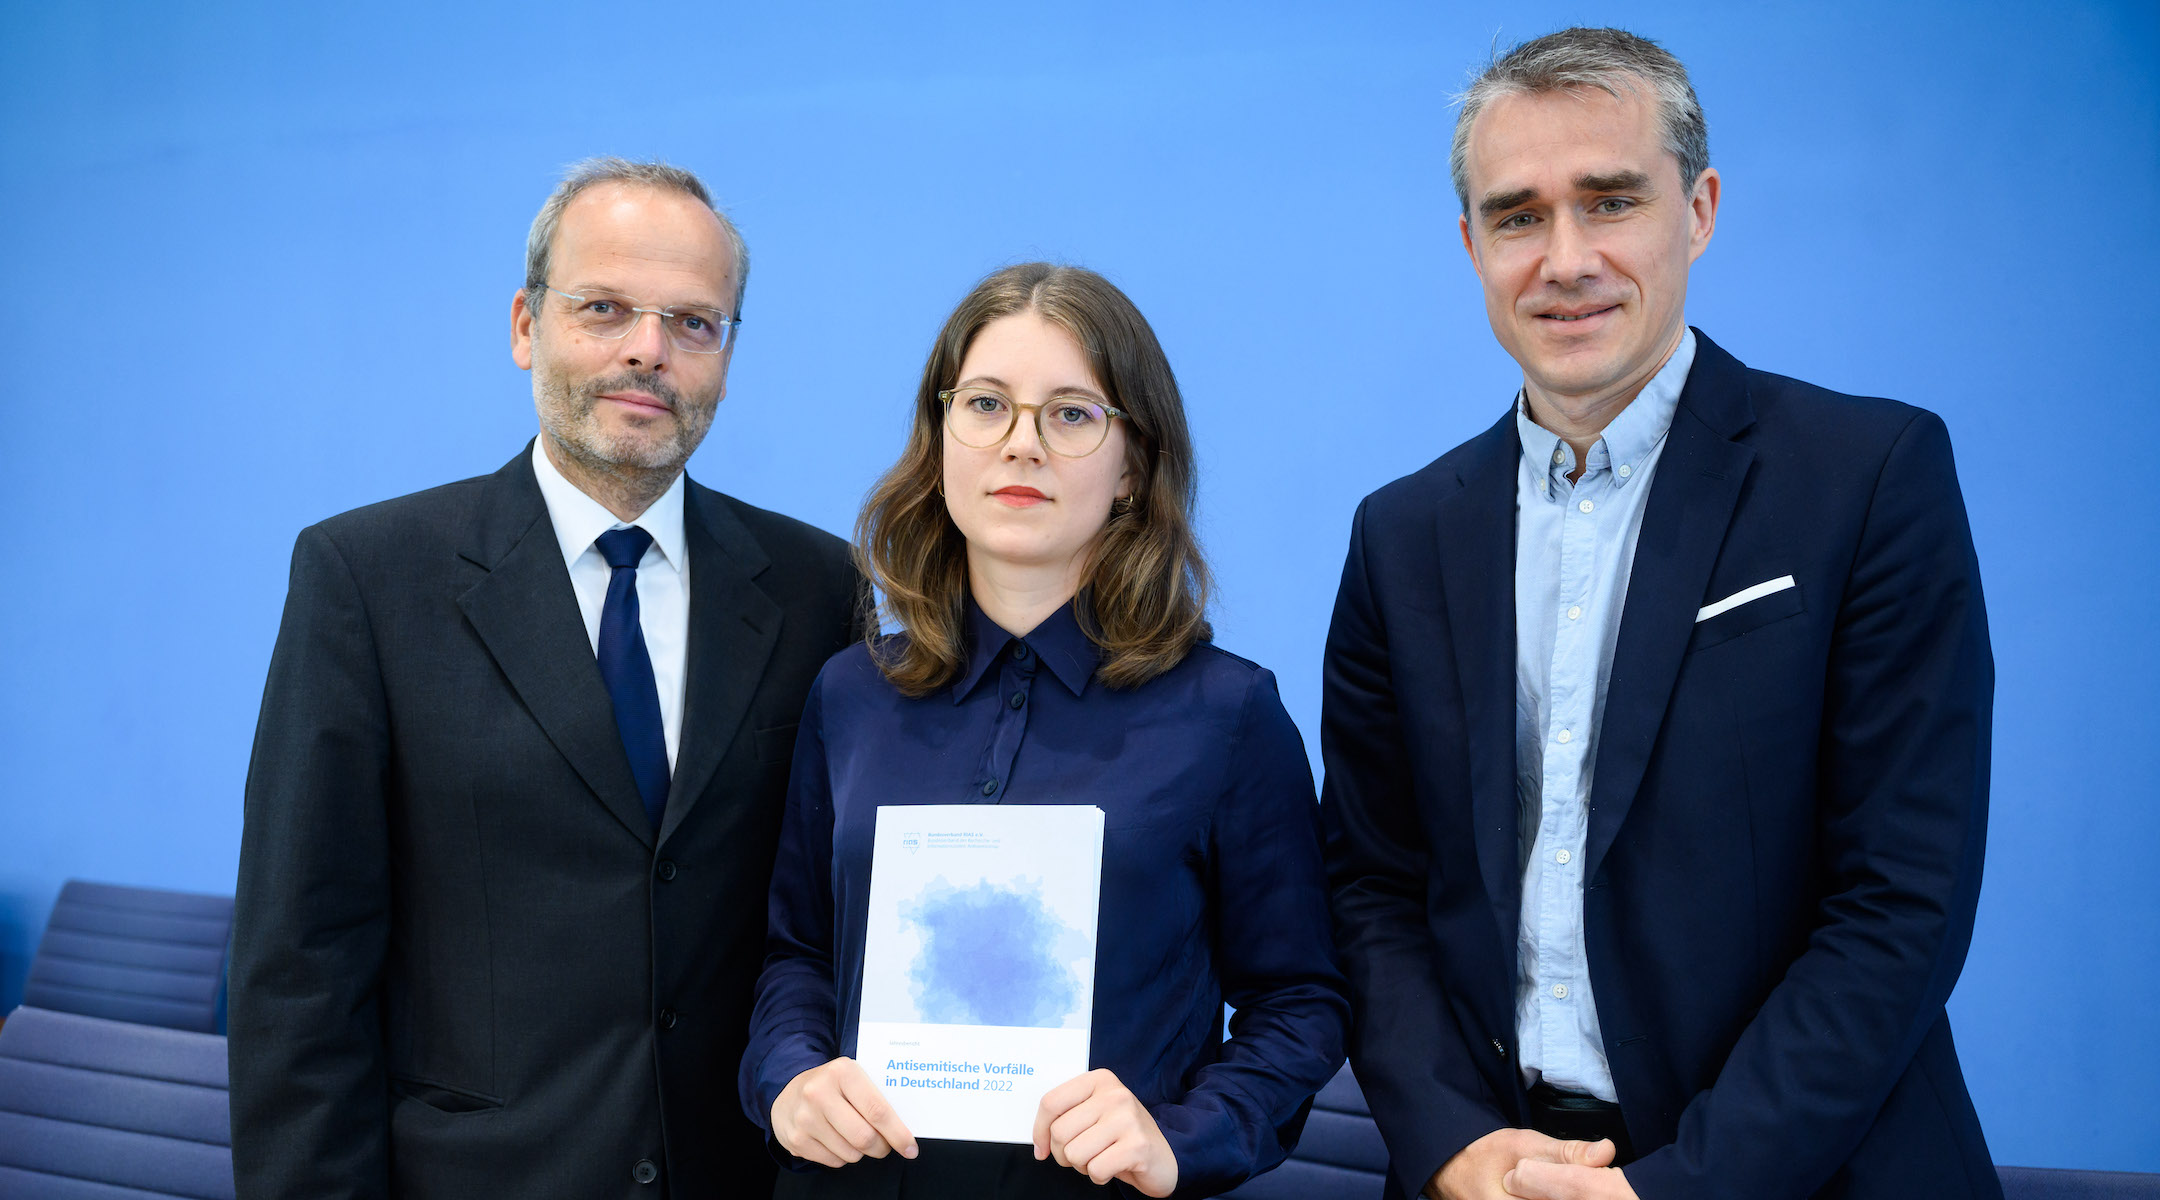 From left to right: Felix Klein, Germany’s antisemitism monitor; Bianca Loy, co-author of the RIAS report; and Benjamin Steinitz, executive director of RIAS, shown in Berlin with the organization’s 2022 antisemitism report, June 27, 2023. (Bernd von Jutrczenka/picture alliance via Getty Images)